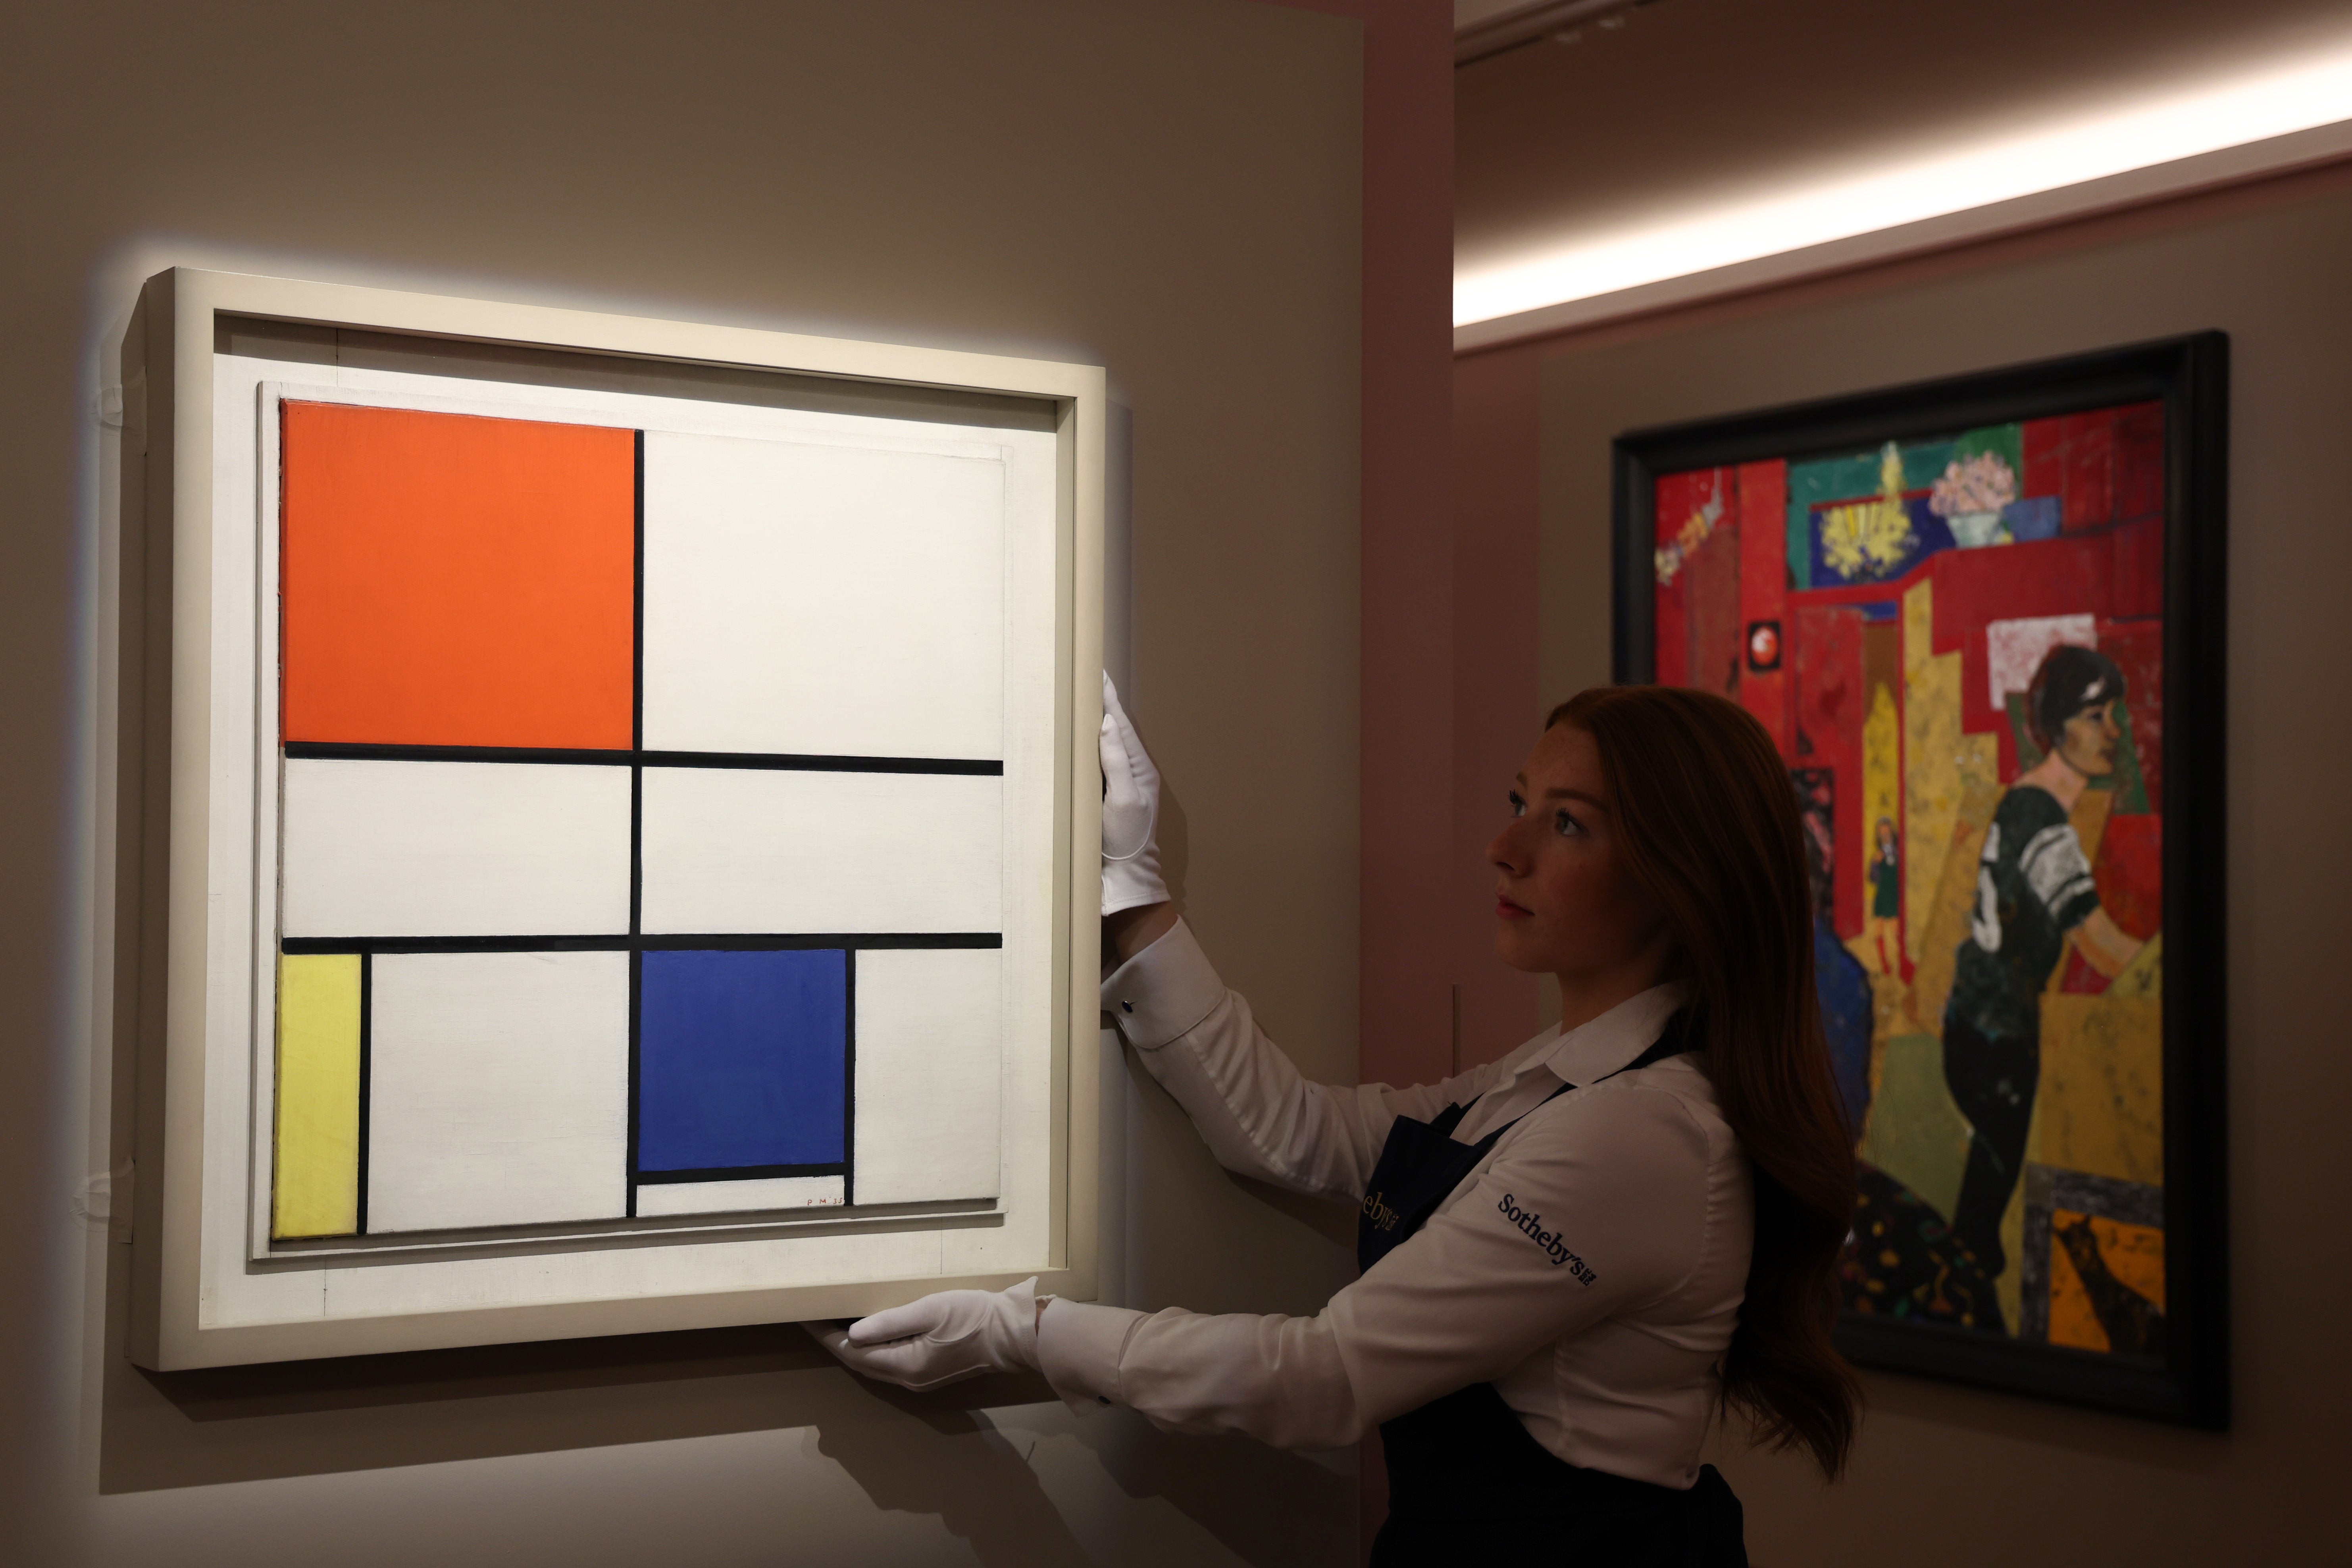 Piet Mondrian’s iconic 1935 painting Composition C (No.III) with Red, Yellow, and Blue is on view at Sotheby